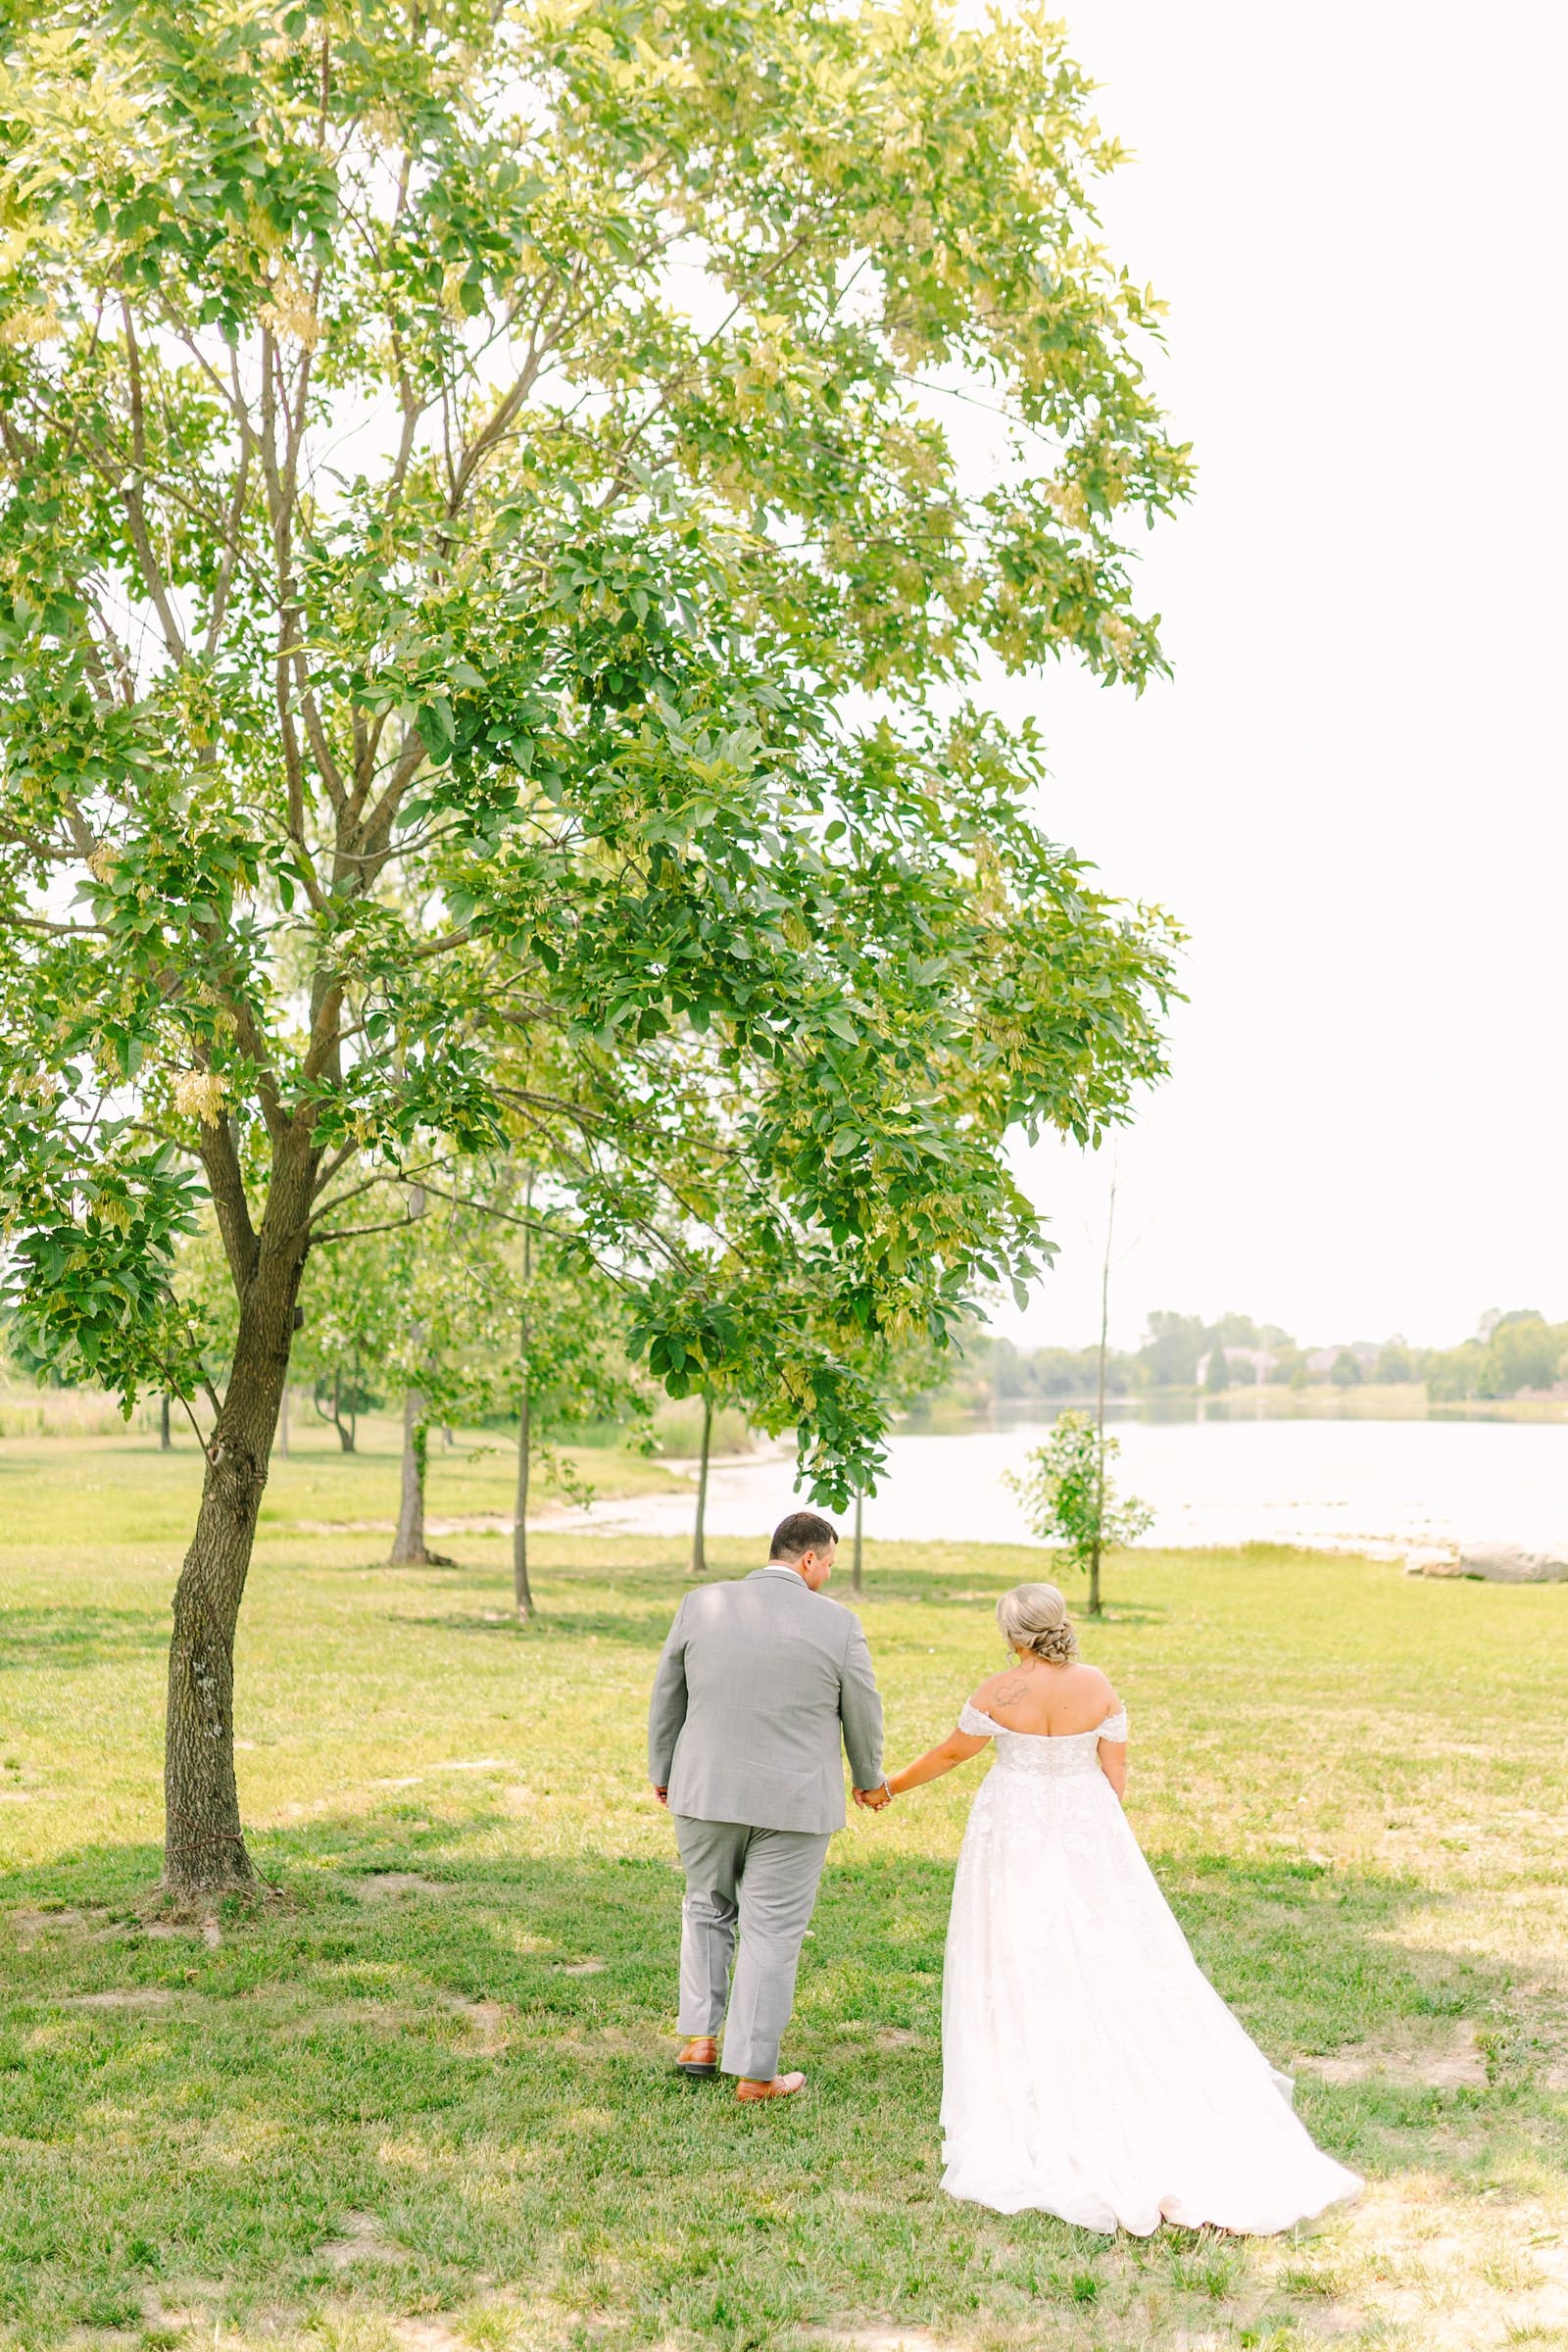 A Sunny Summer Wedding at Friedman Park in Newburgh Indiana | Paige and Dylan | Bret and Brandie Photography084.jpg